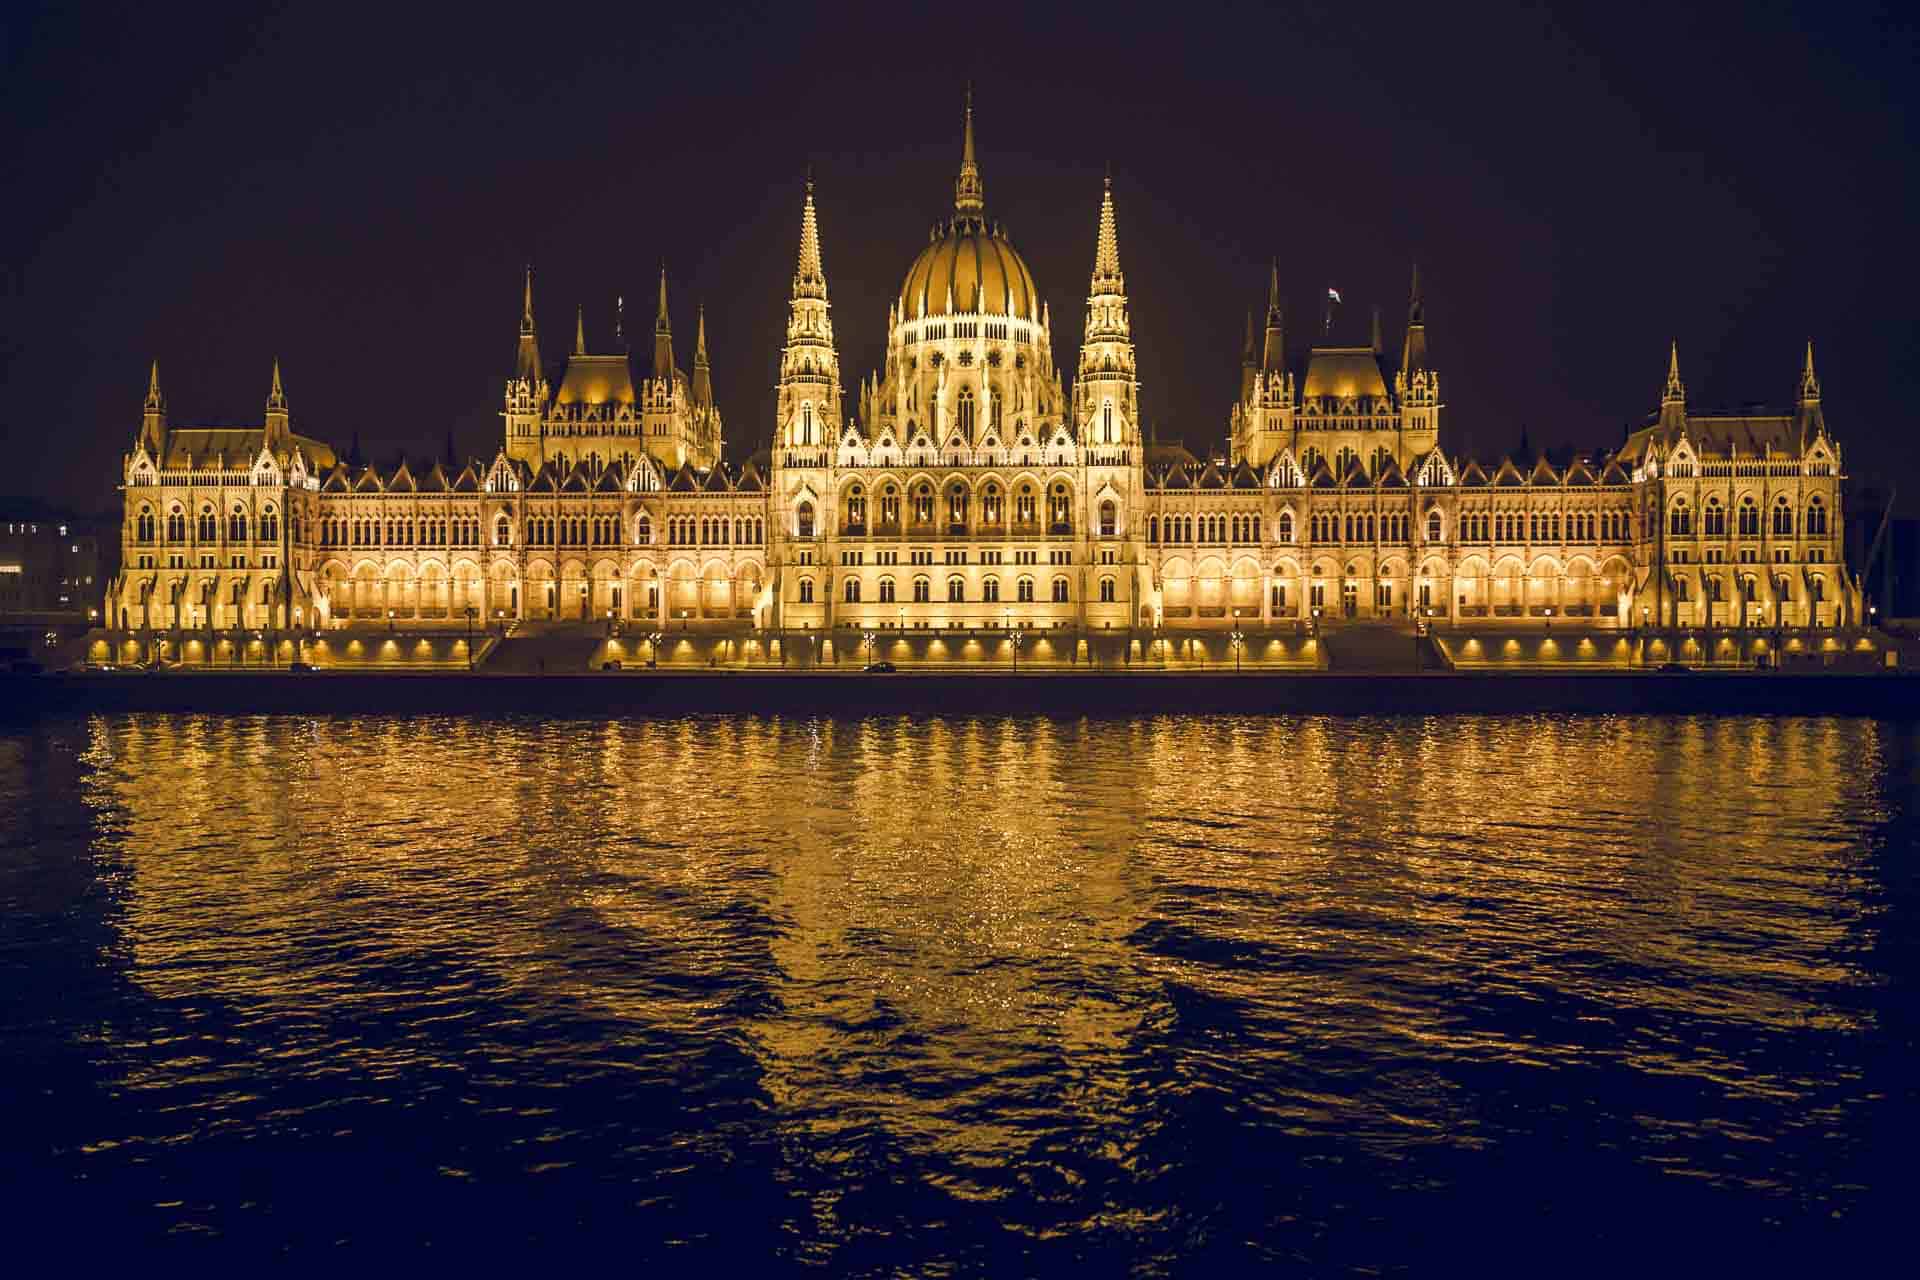 The Parliament Buildings in Budapest, Hungary at night